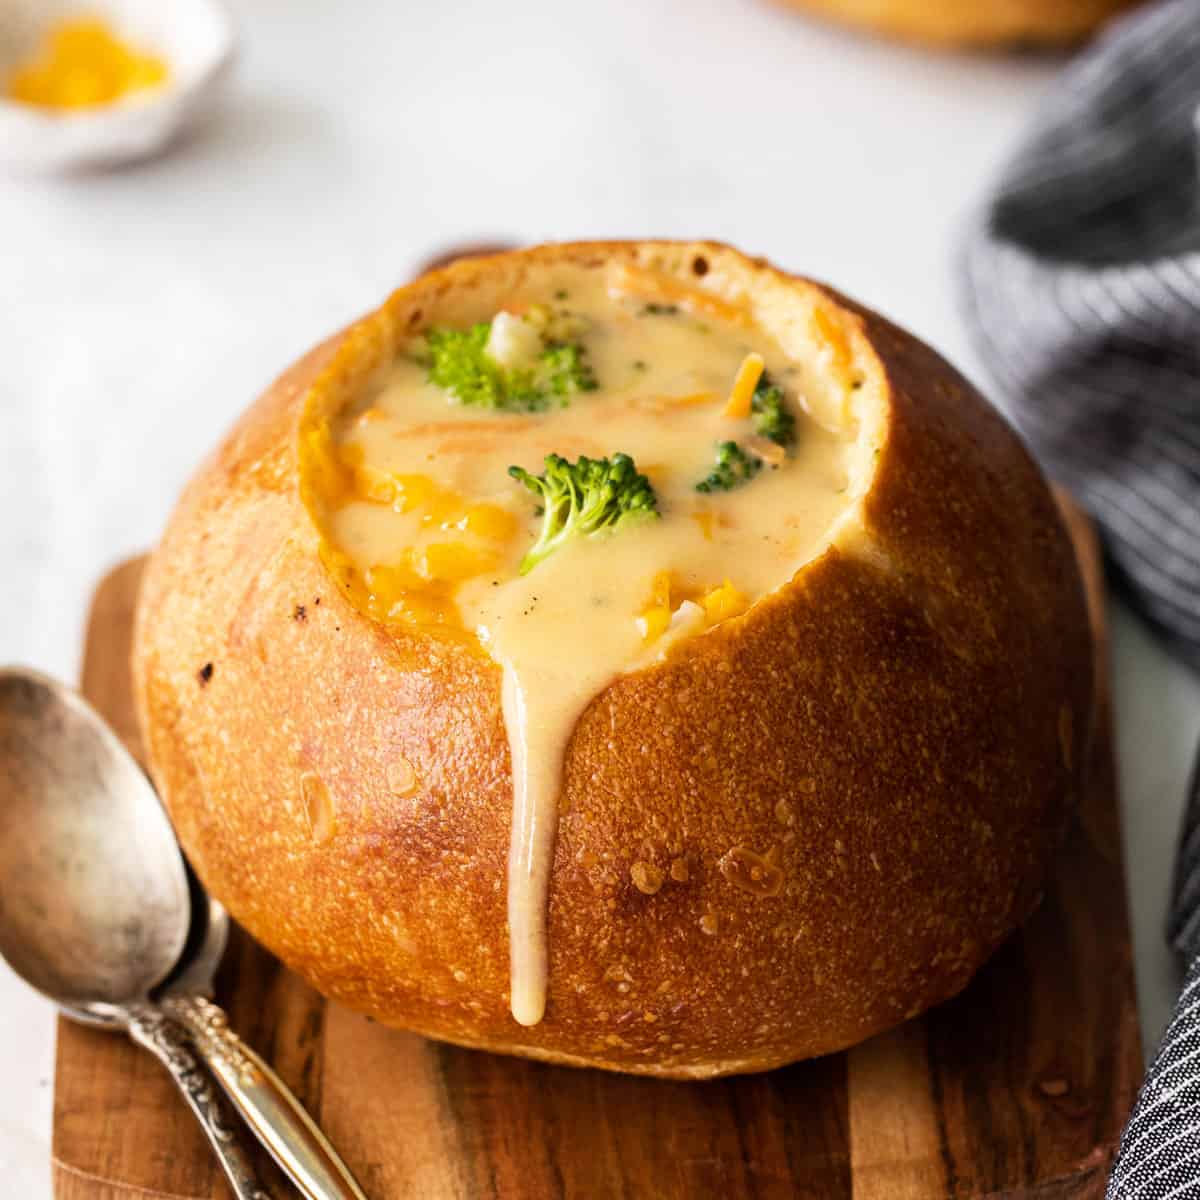 https://fitfoodiefinds.com/wp-content/uploads/2021/10/Panera-Broccoli-Cheddar-Soup-03.jpg